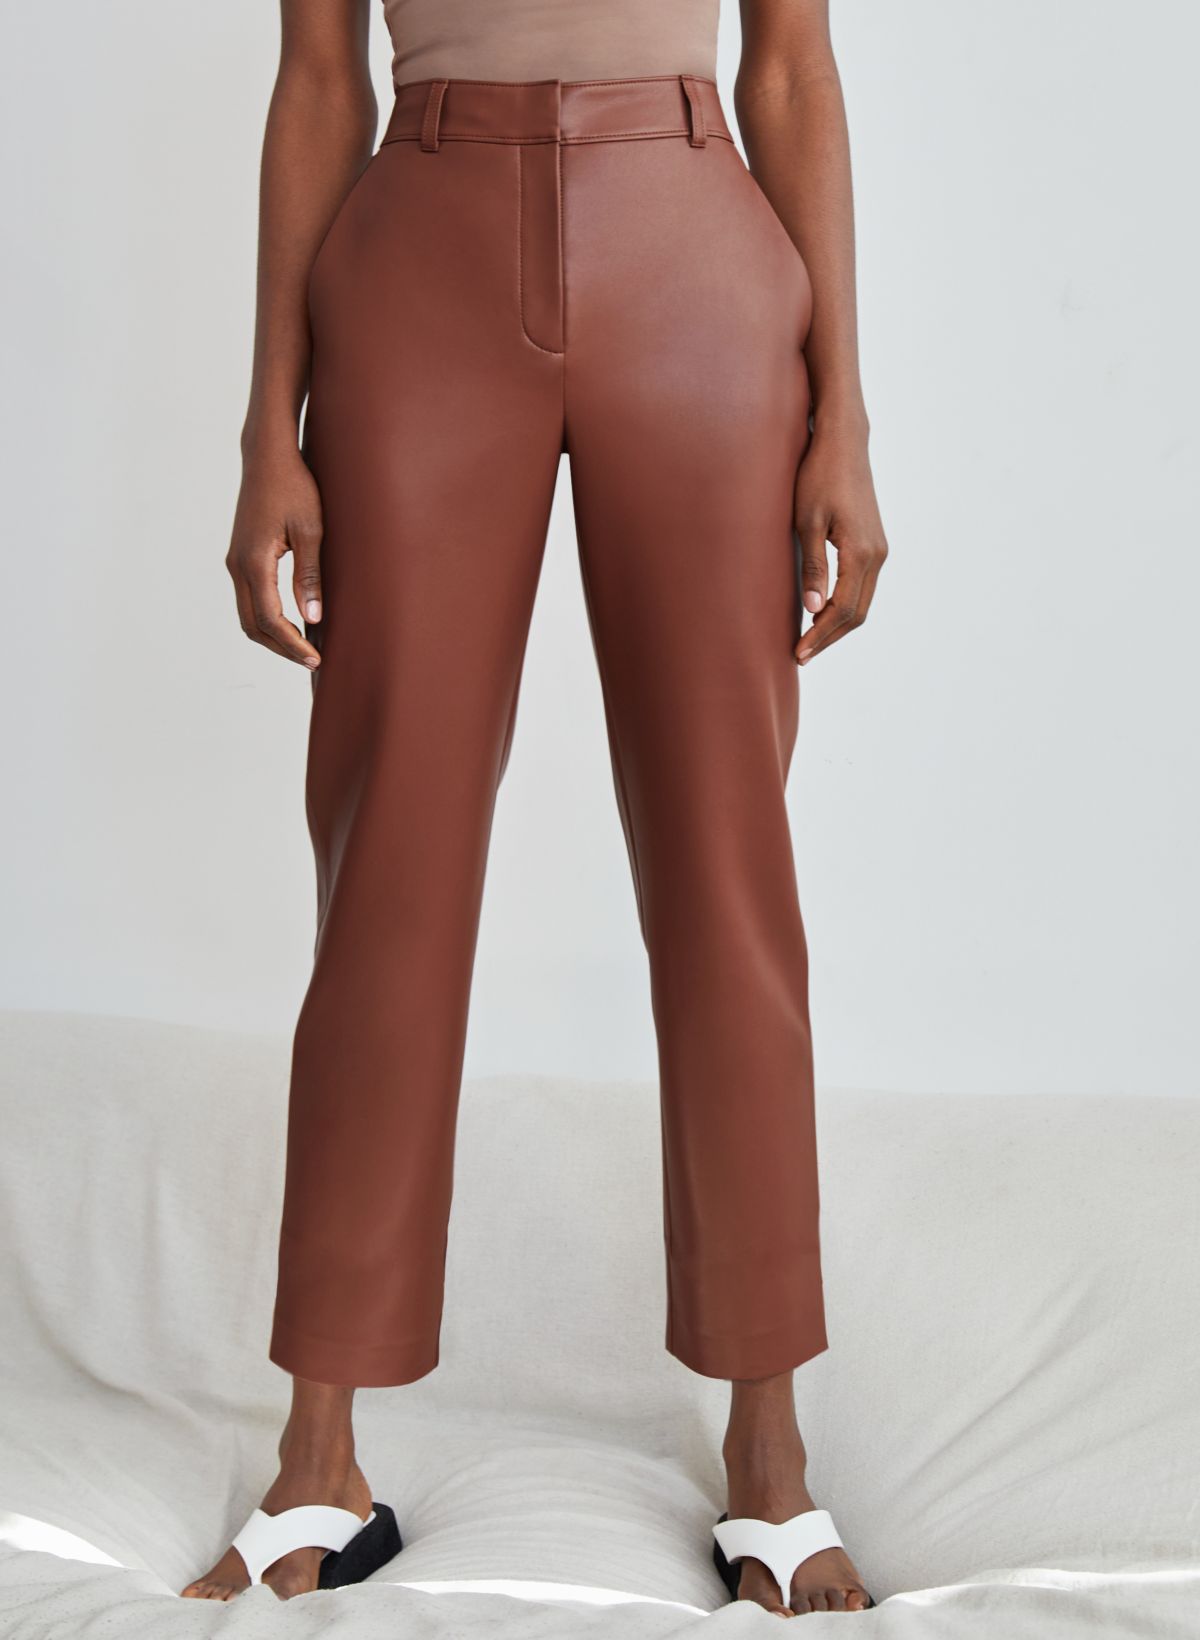 Read The Room Camel Brown Vegan Leather Shorts